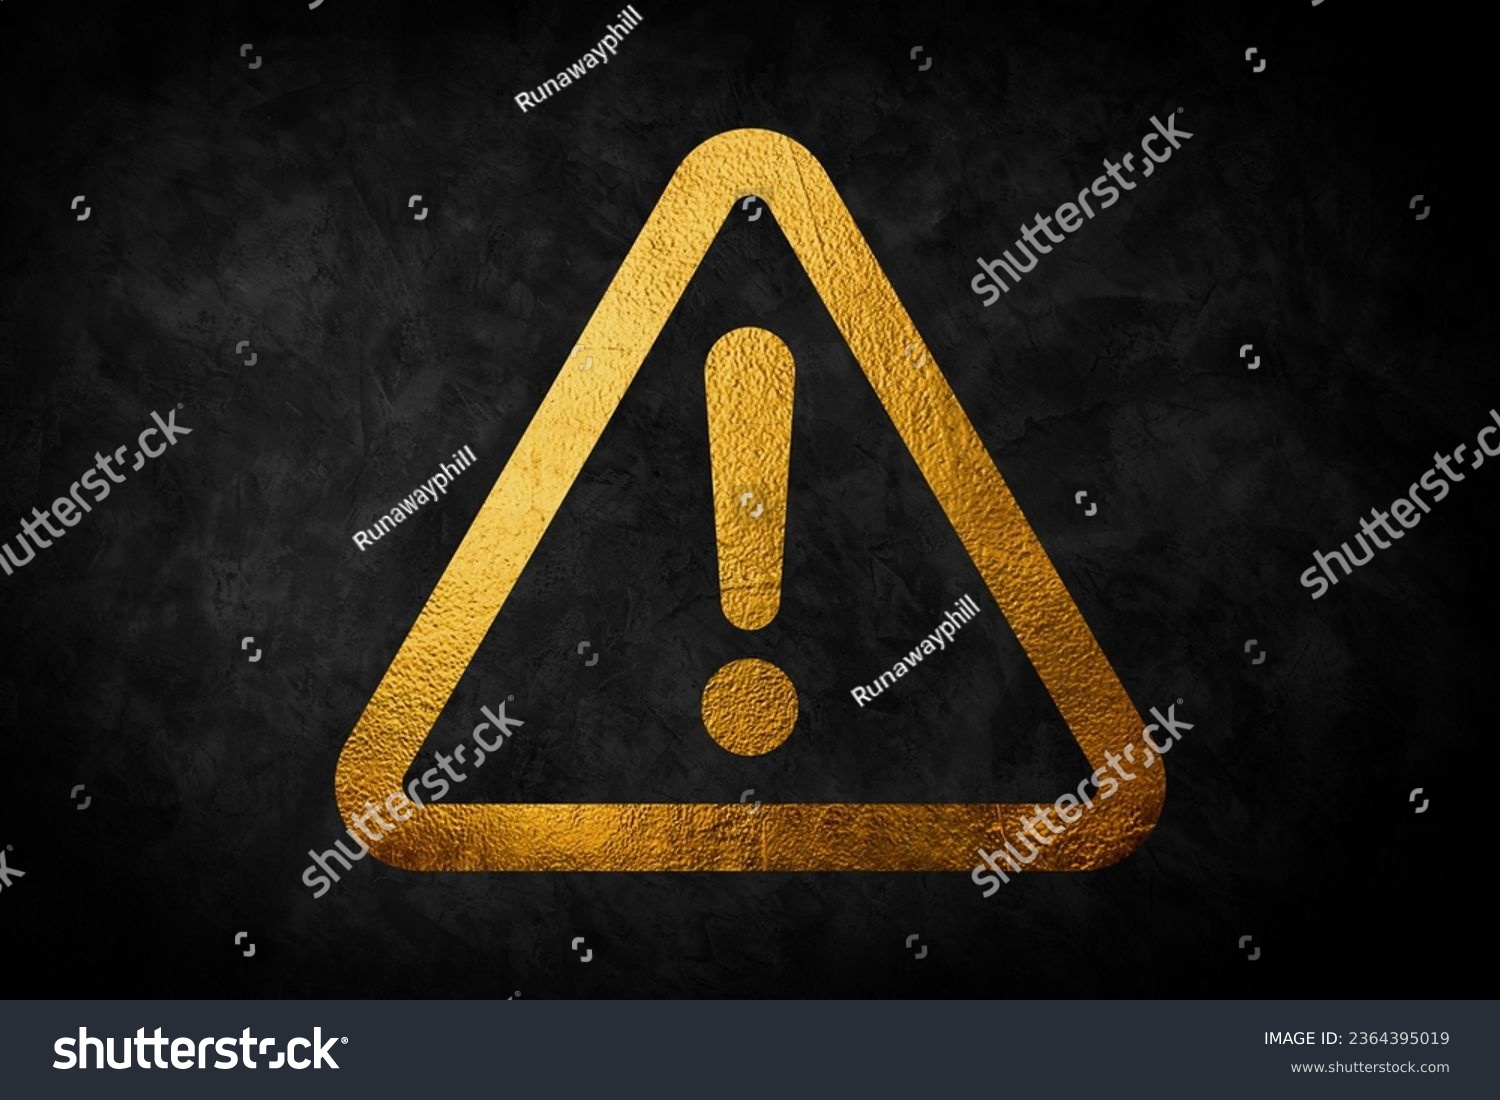 Yellow and Golden hazard warning attention sign with exclamation mark symbol on black background. #2364395019